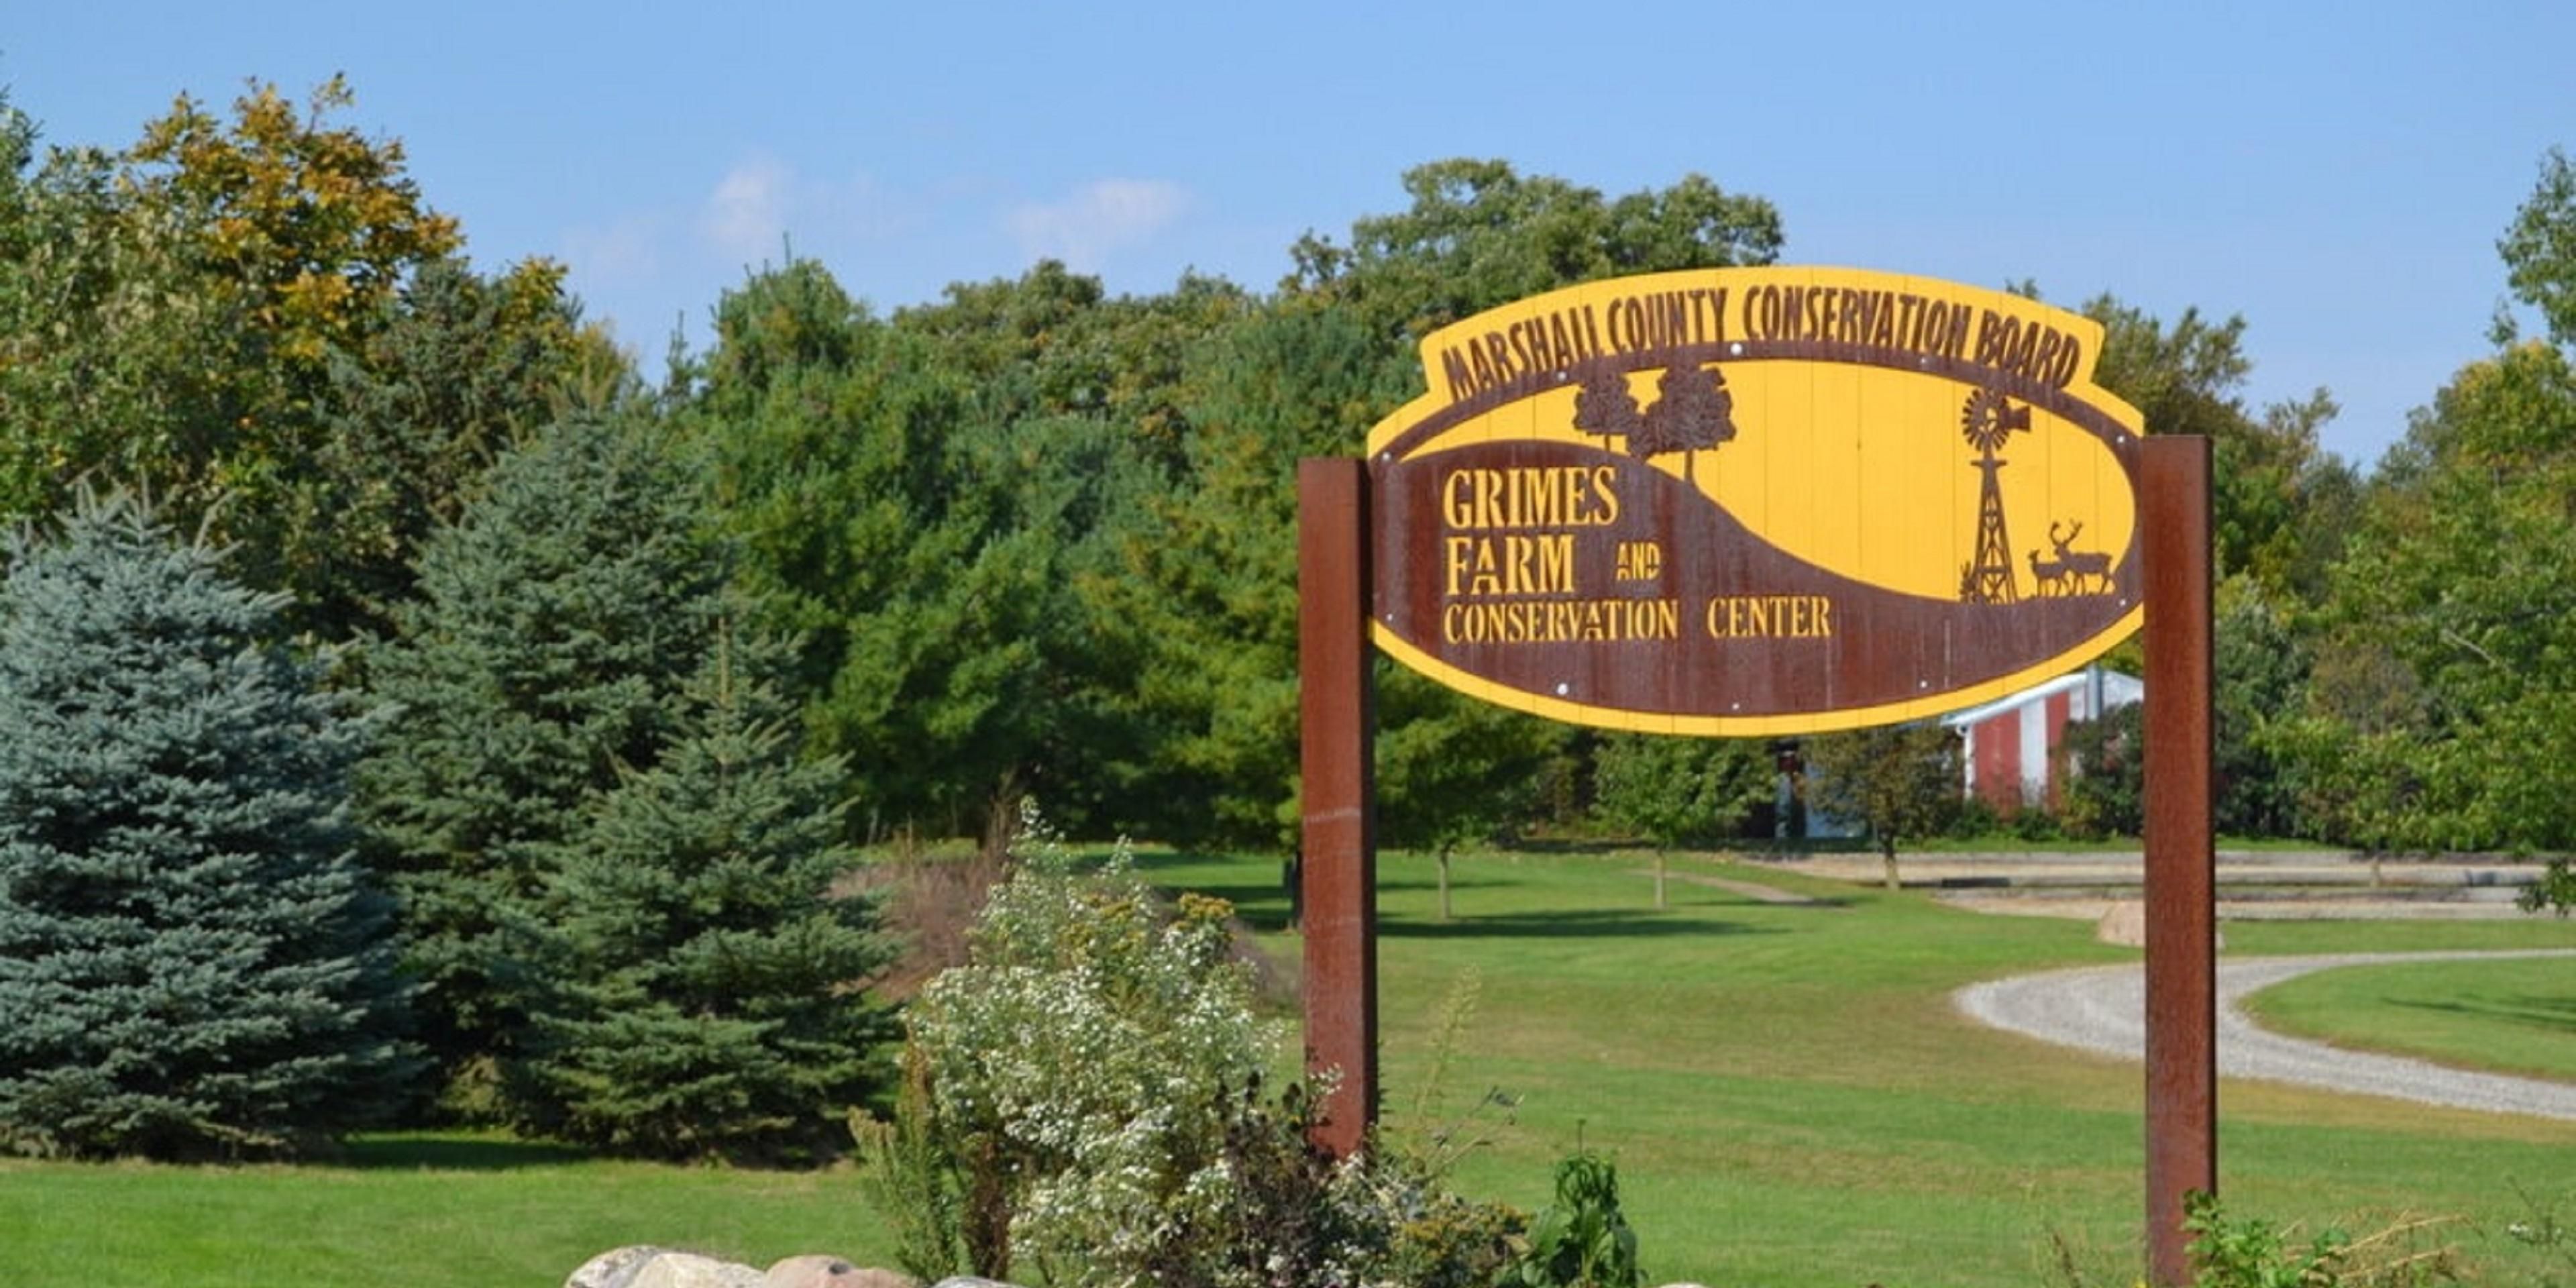 Just outside of Marshalltown is the Grimes Farm and Nature Preserve. This outdoor recreation area features Hiking, Biking, Observation towers and Bird-watching. Winter activities include cross country skiing and snowshoeing. Operating hours subject to change throughout the year. 